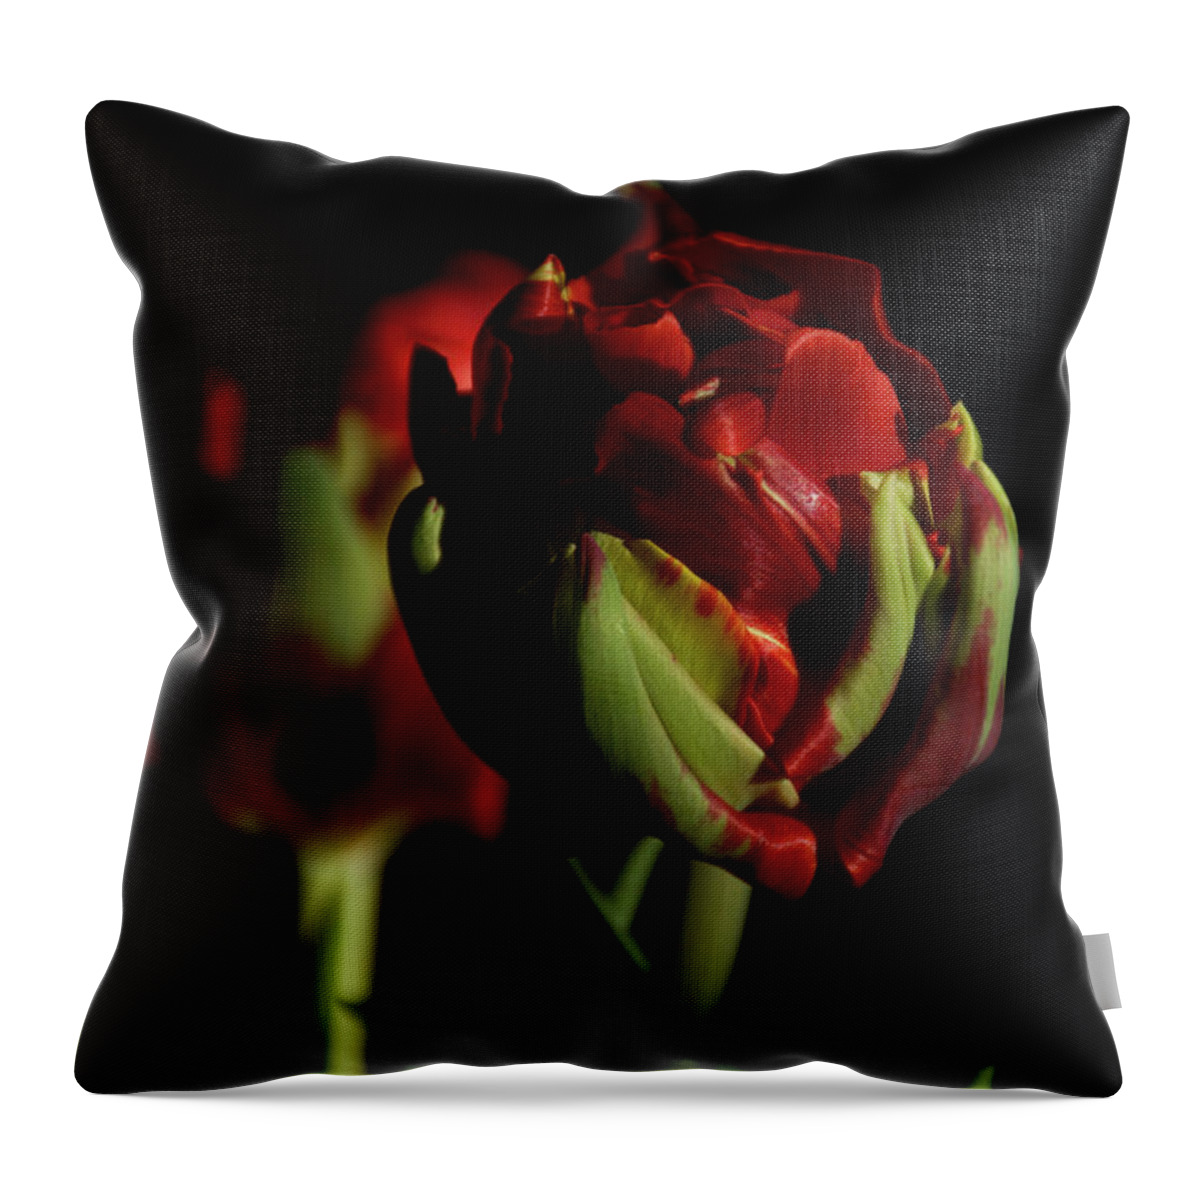 Flowers Throw Pillow featuring the photograph Opening Slowly by Ellery Russell